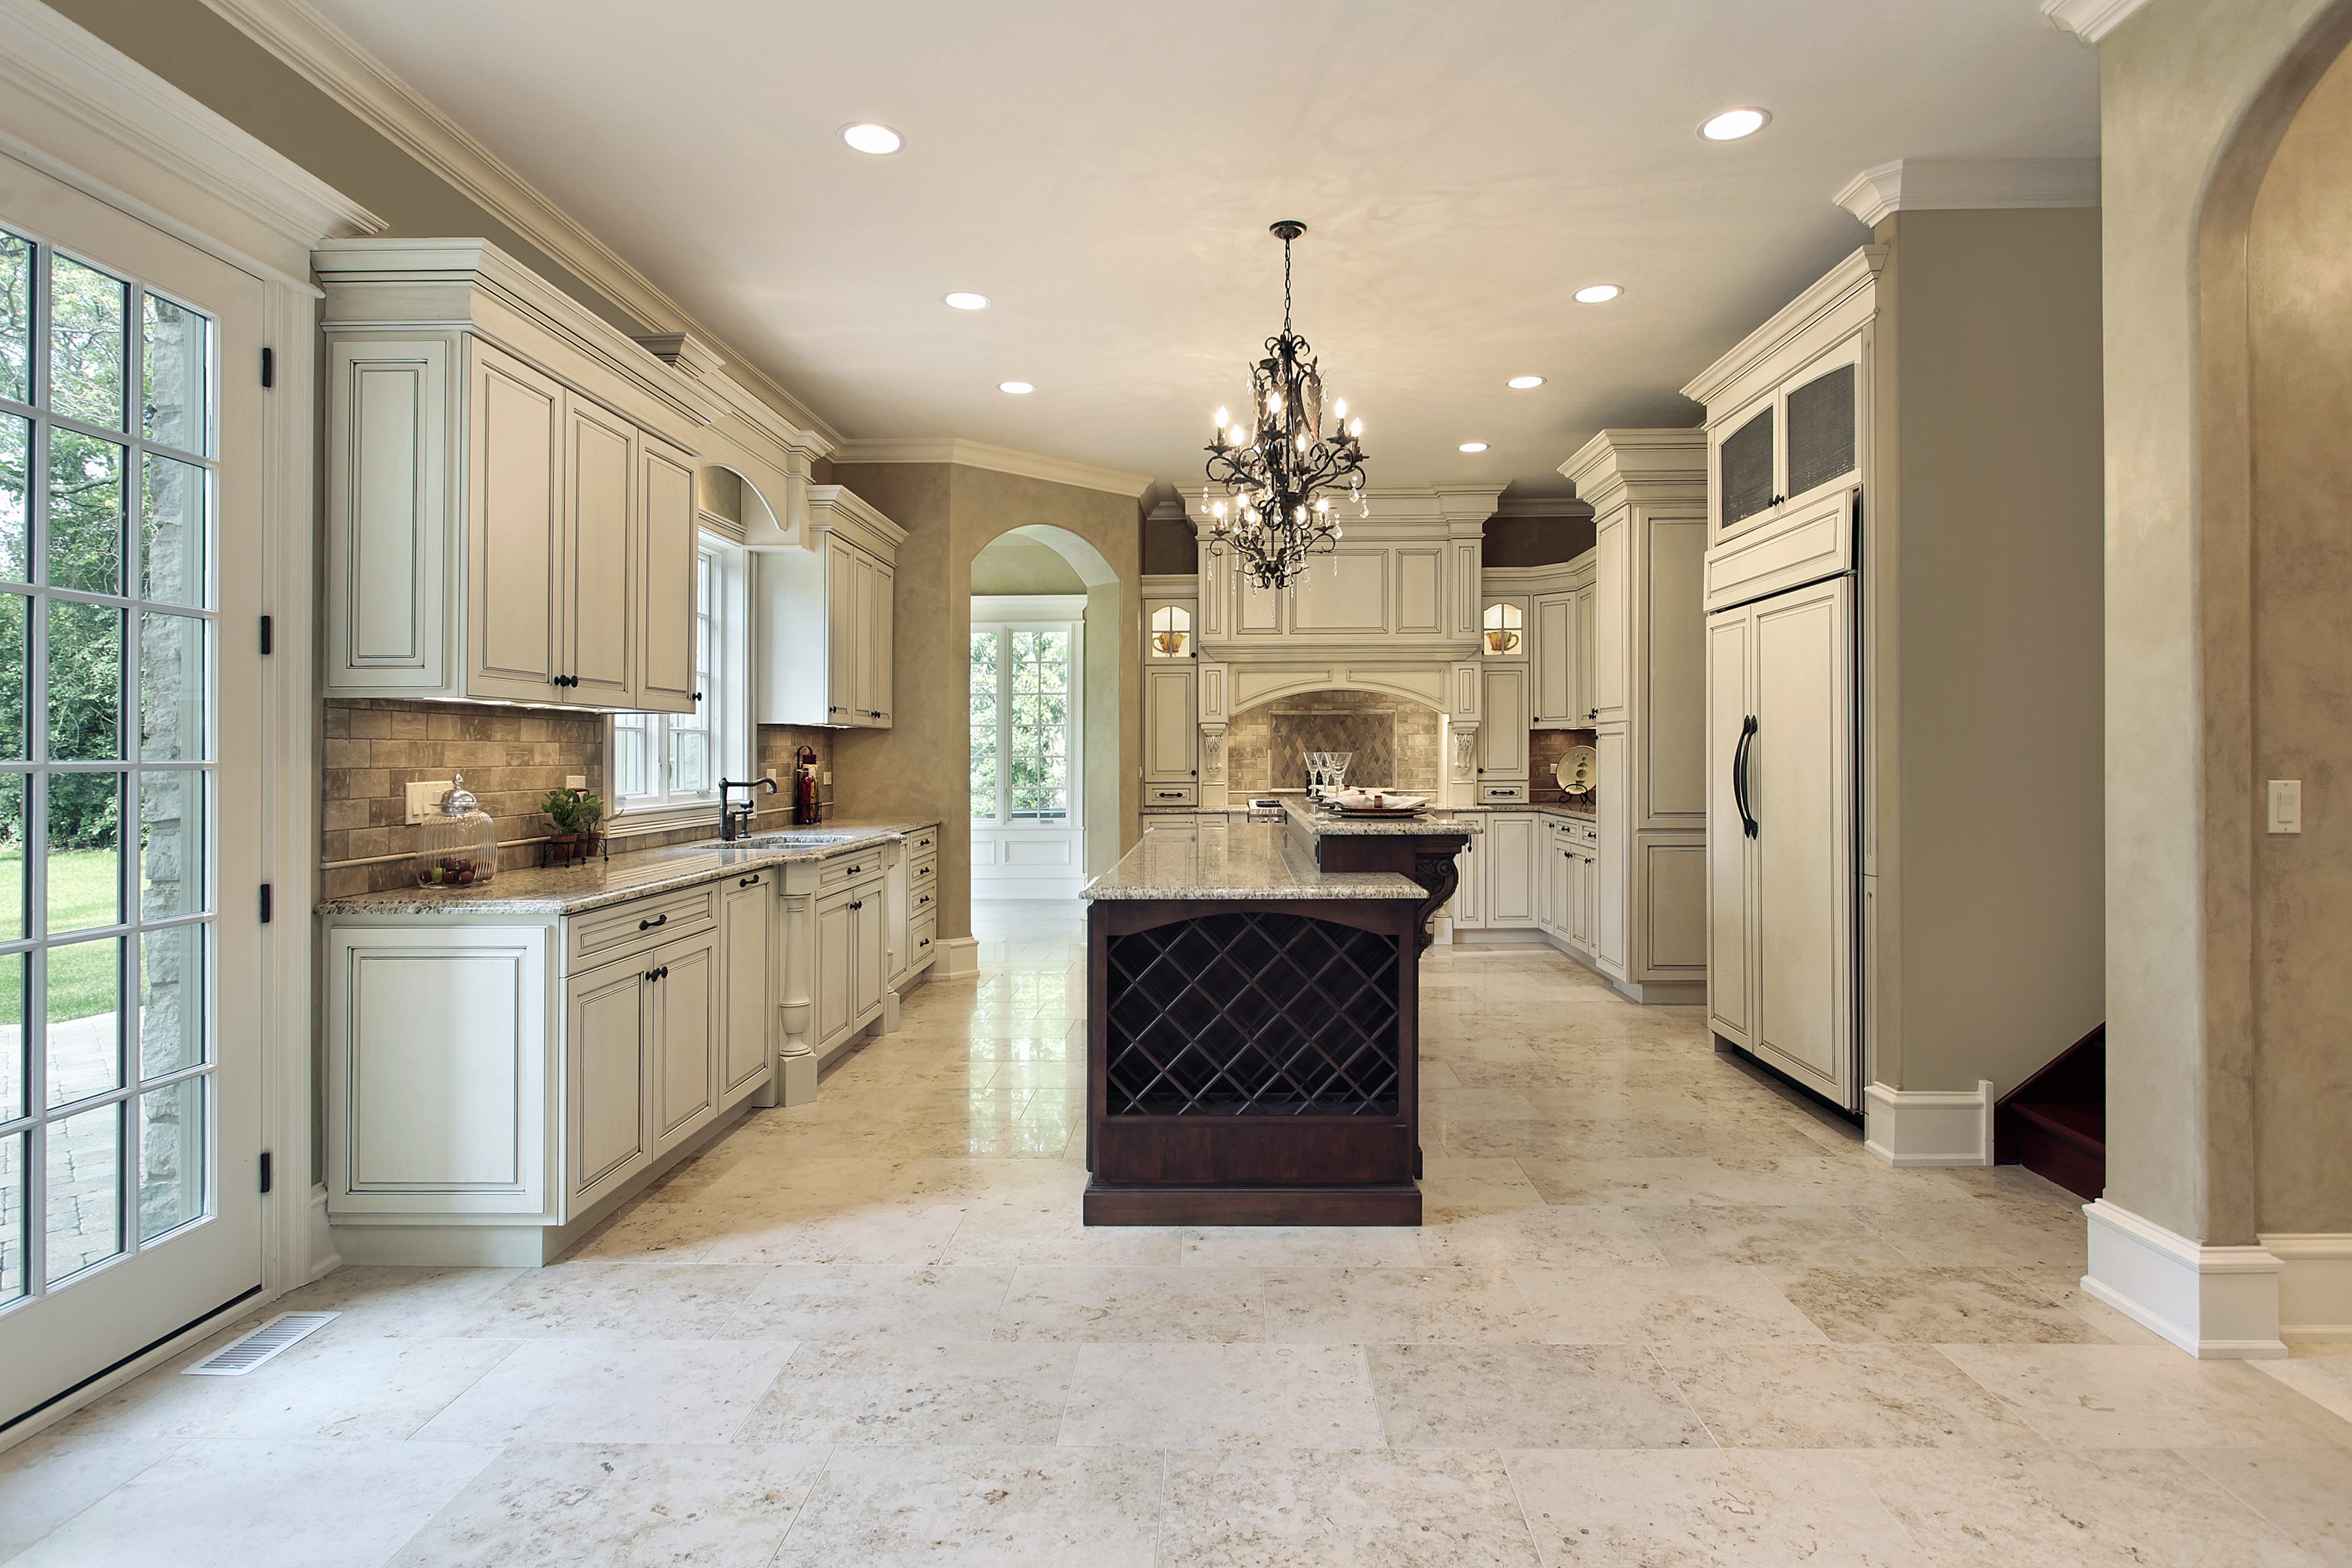 Should You Make Kitchen Improvements Before You Sell Your Home in Tampa Bay?